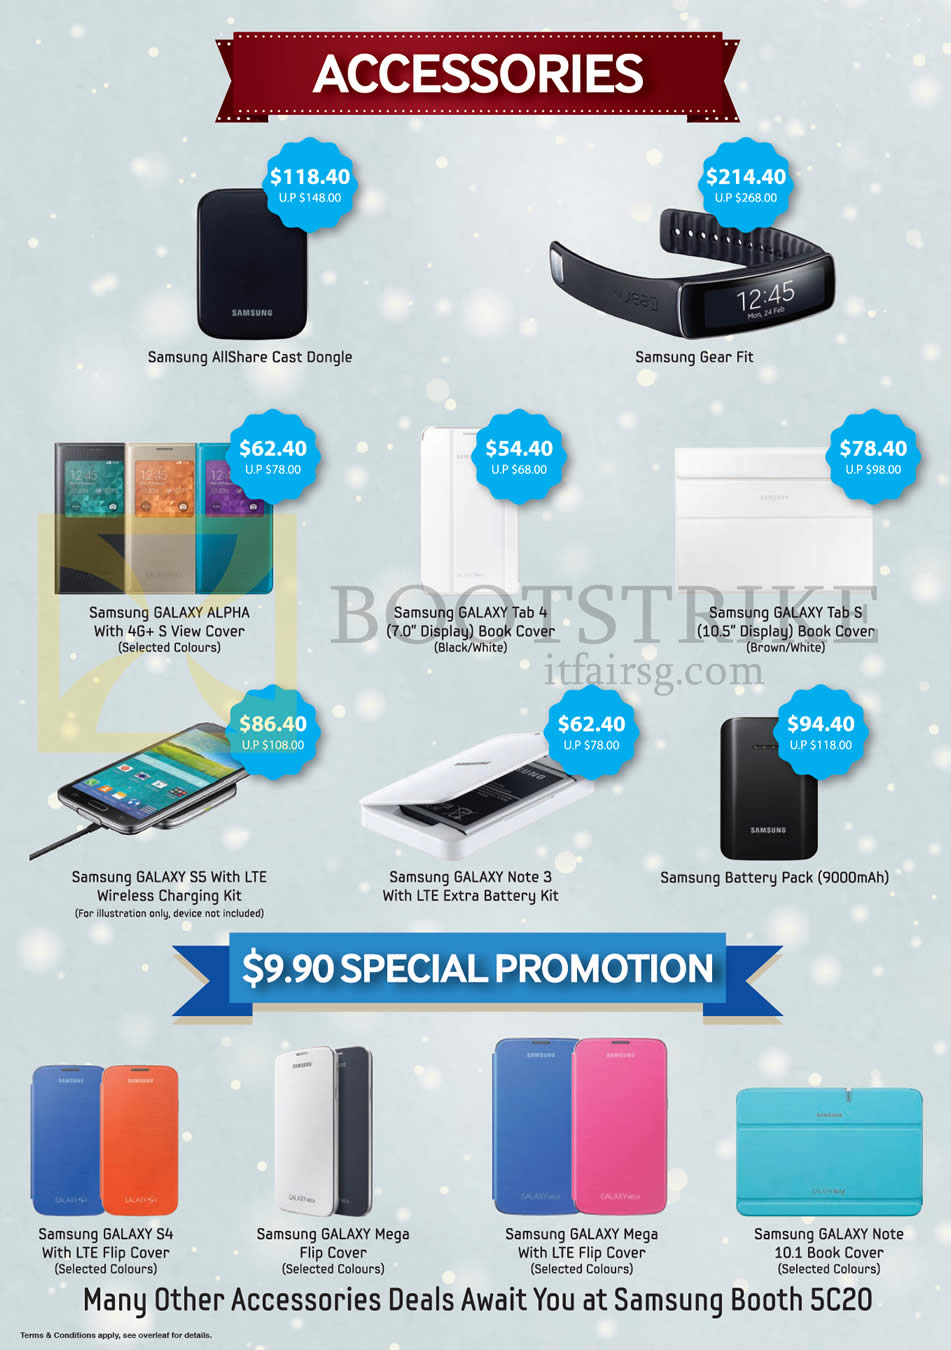 SITEX 2014 price list image brochure of Samsung Accessories, 9.90 Covers, Hear Fit, View Cover, Book Cover, Charging Kit, Battery Pack, LTE Flip Cover, Book Cover